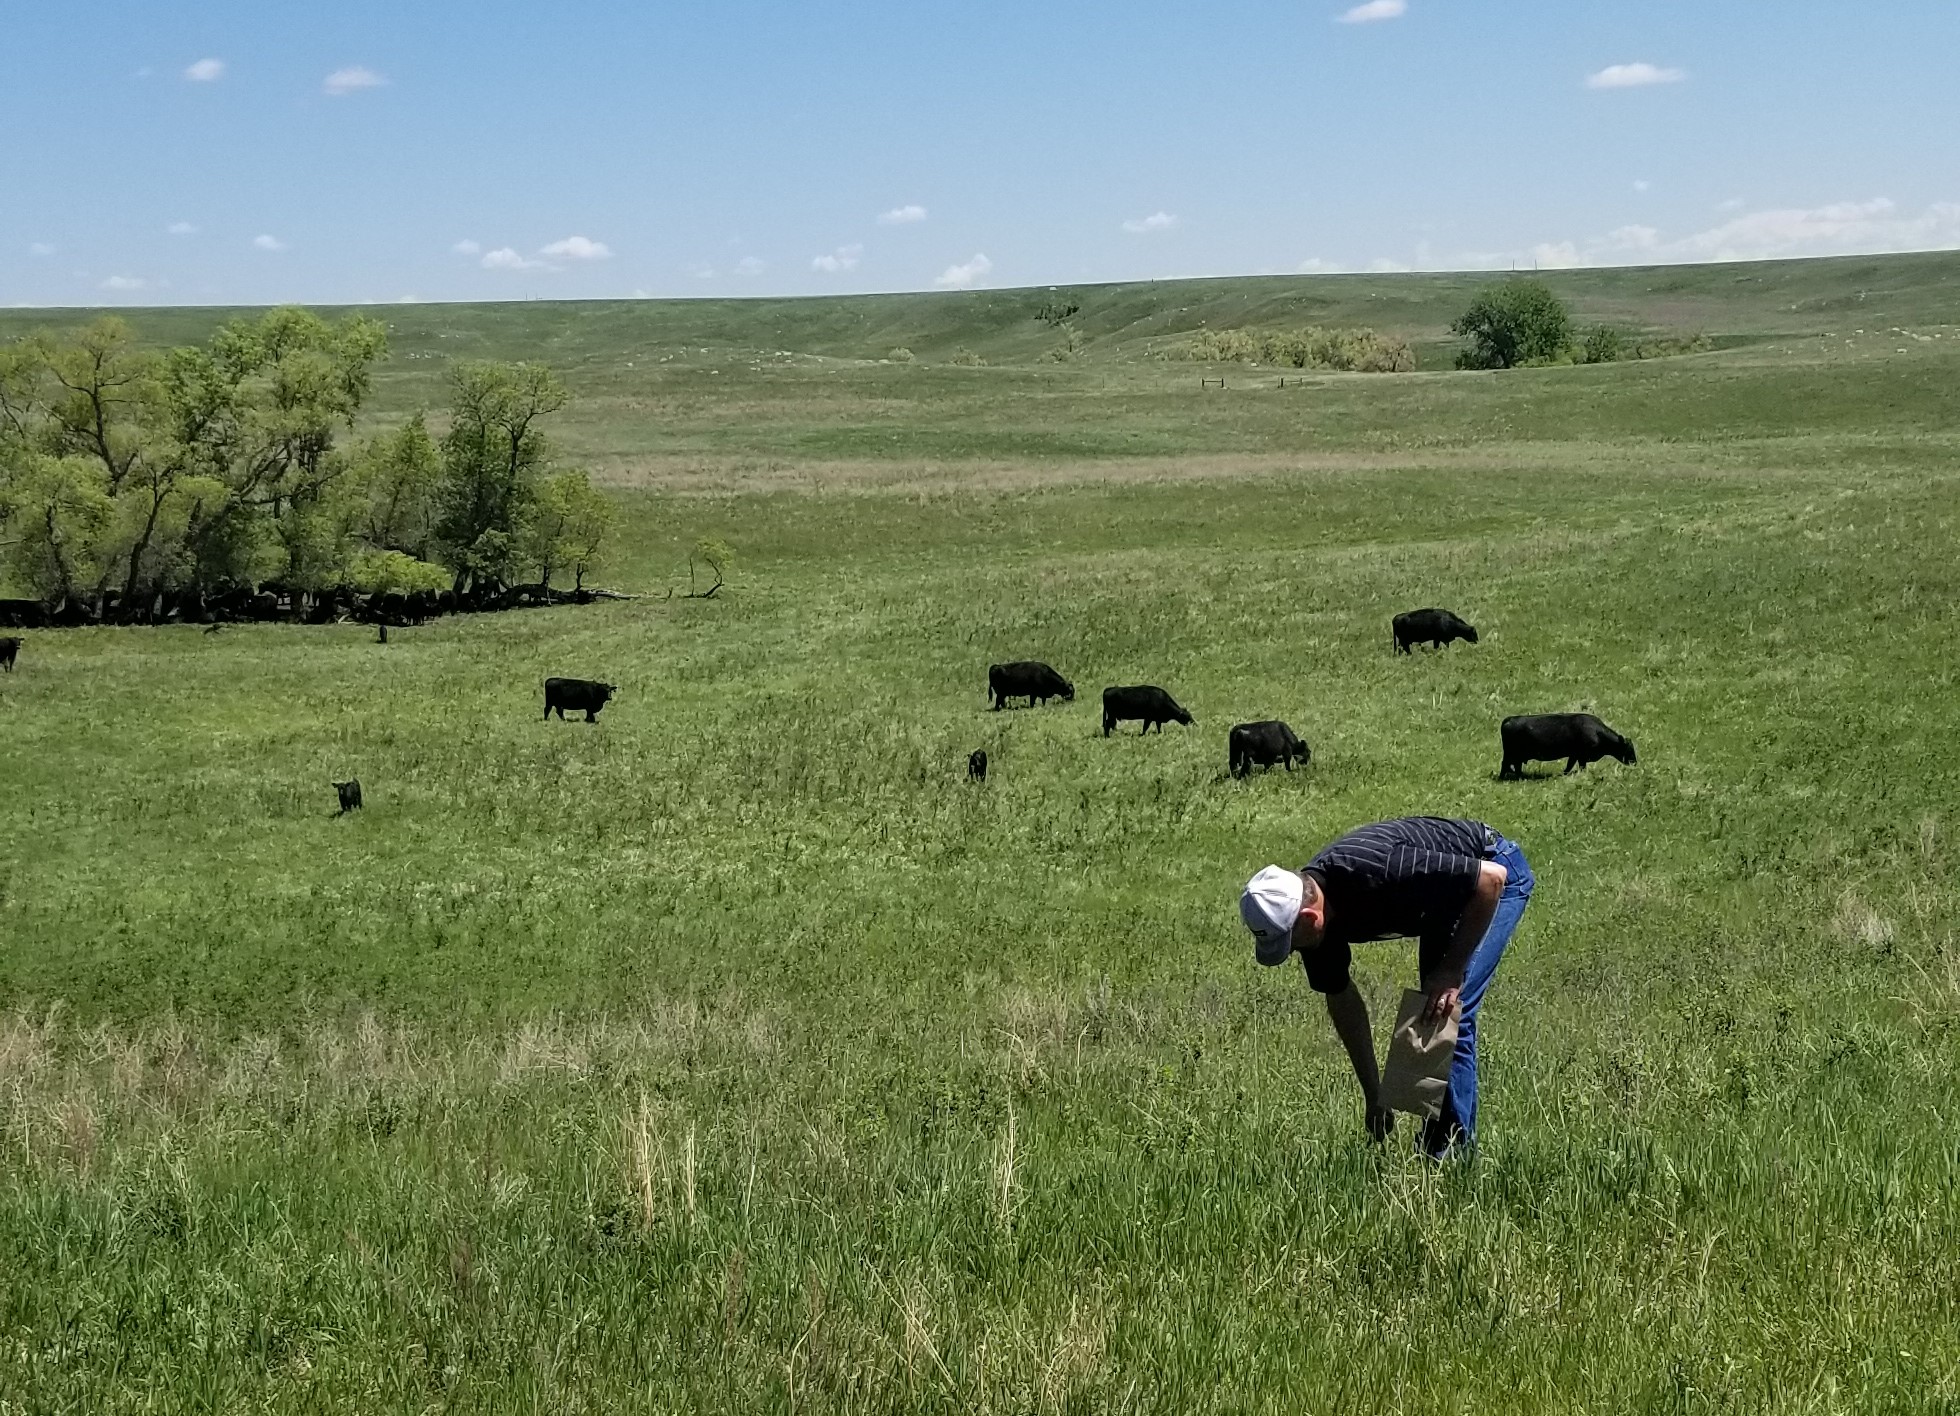 A valuable component of the program is laboratory analysis for mineral content of forage and water samples submitted by participating operations. (NDSU photo)